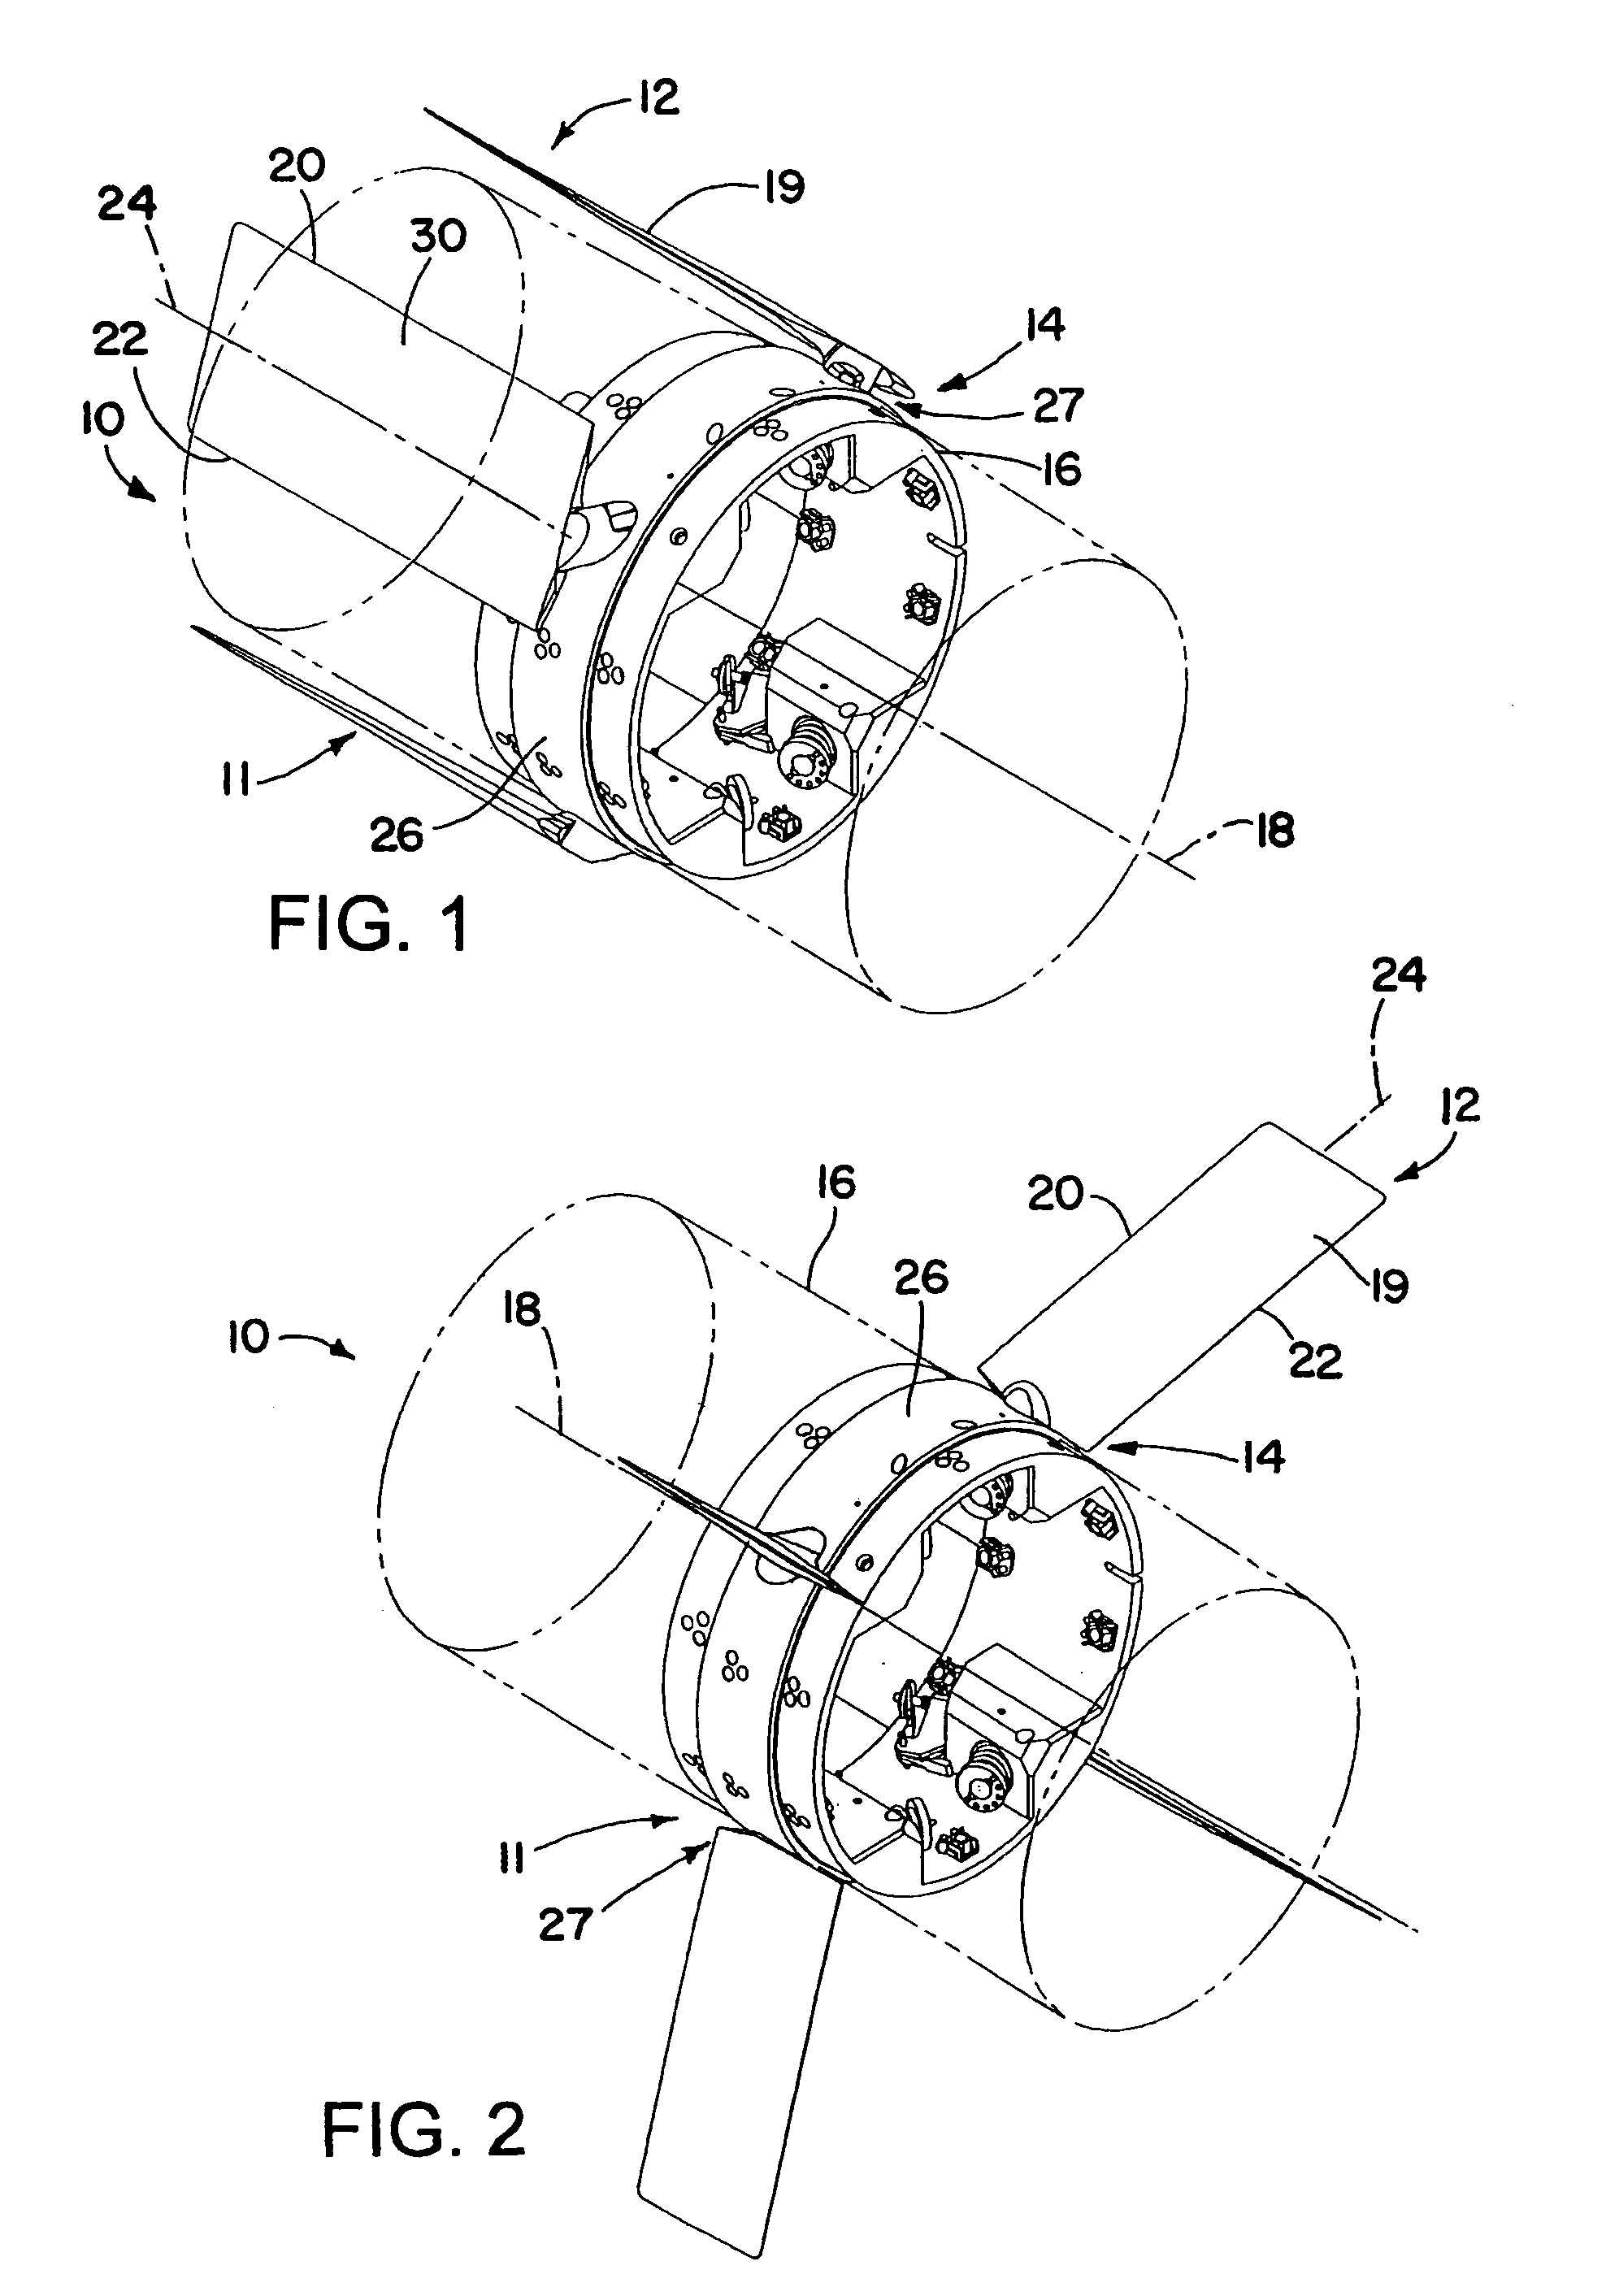 Single-axis fin deployment system